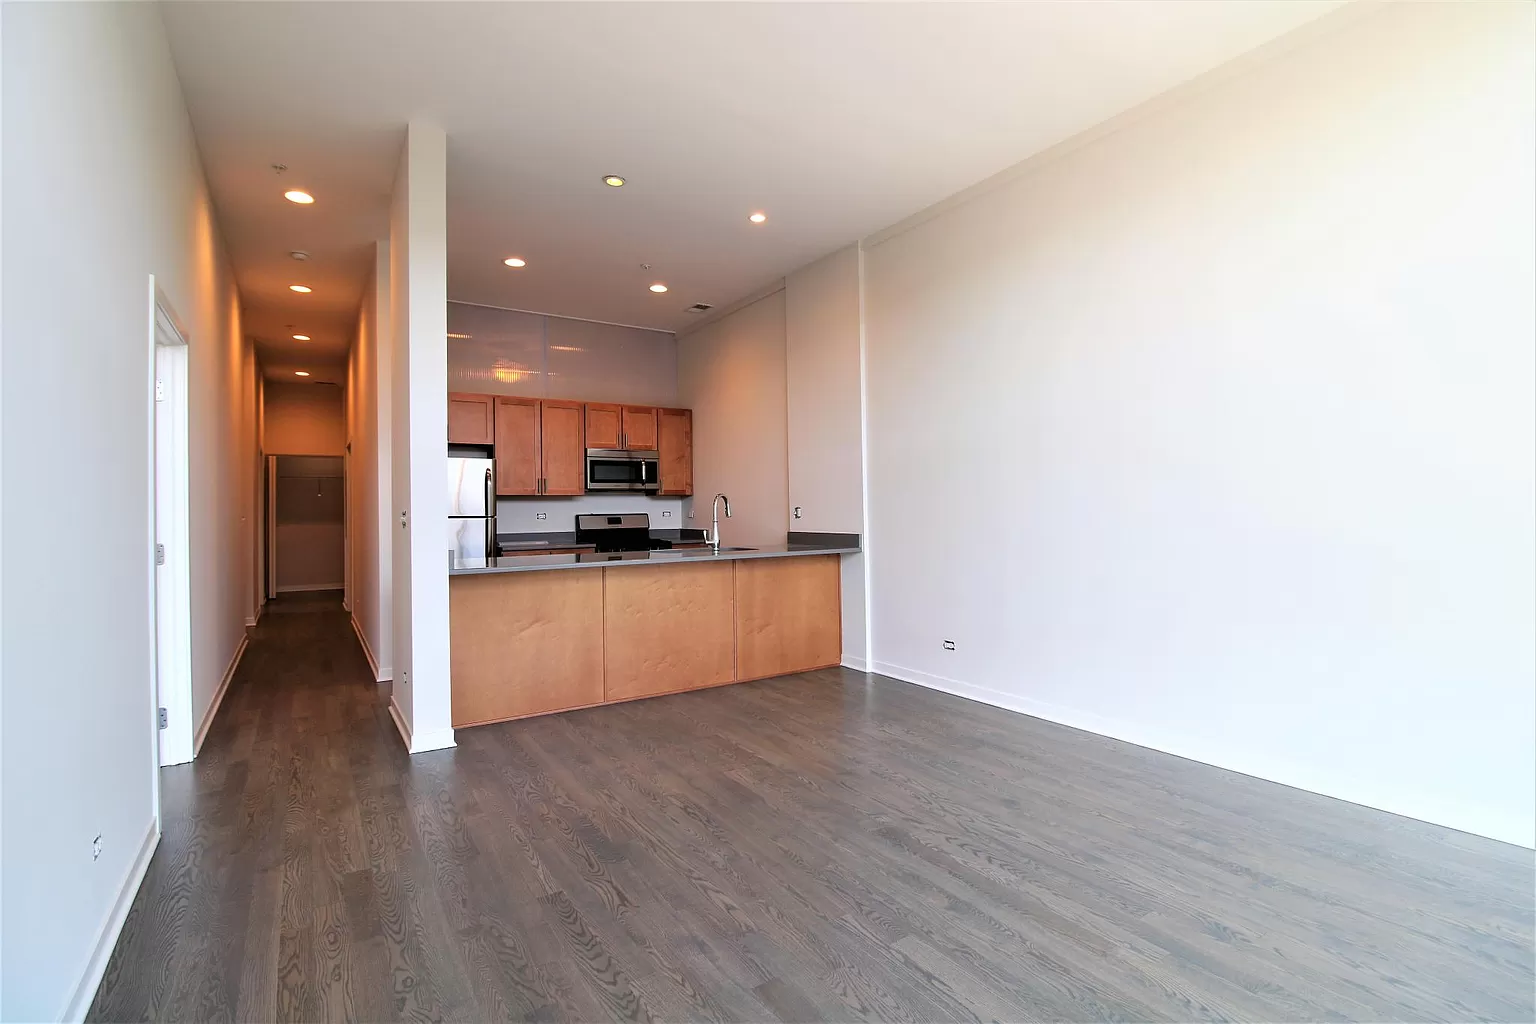 2.5 Bed 2 bath apartment - Available for lease takeover or looking for a room mate